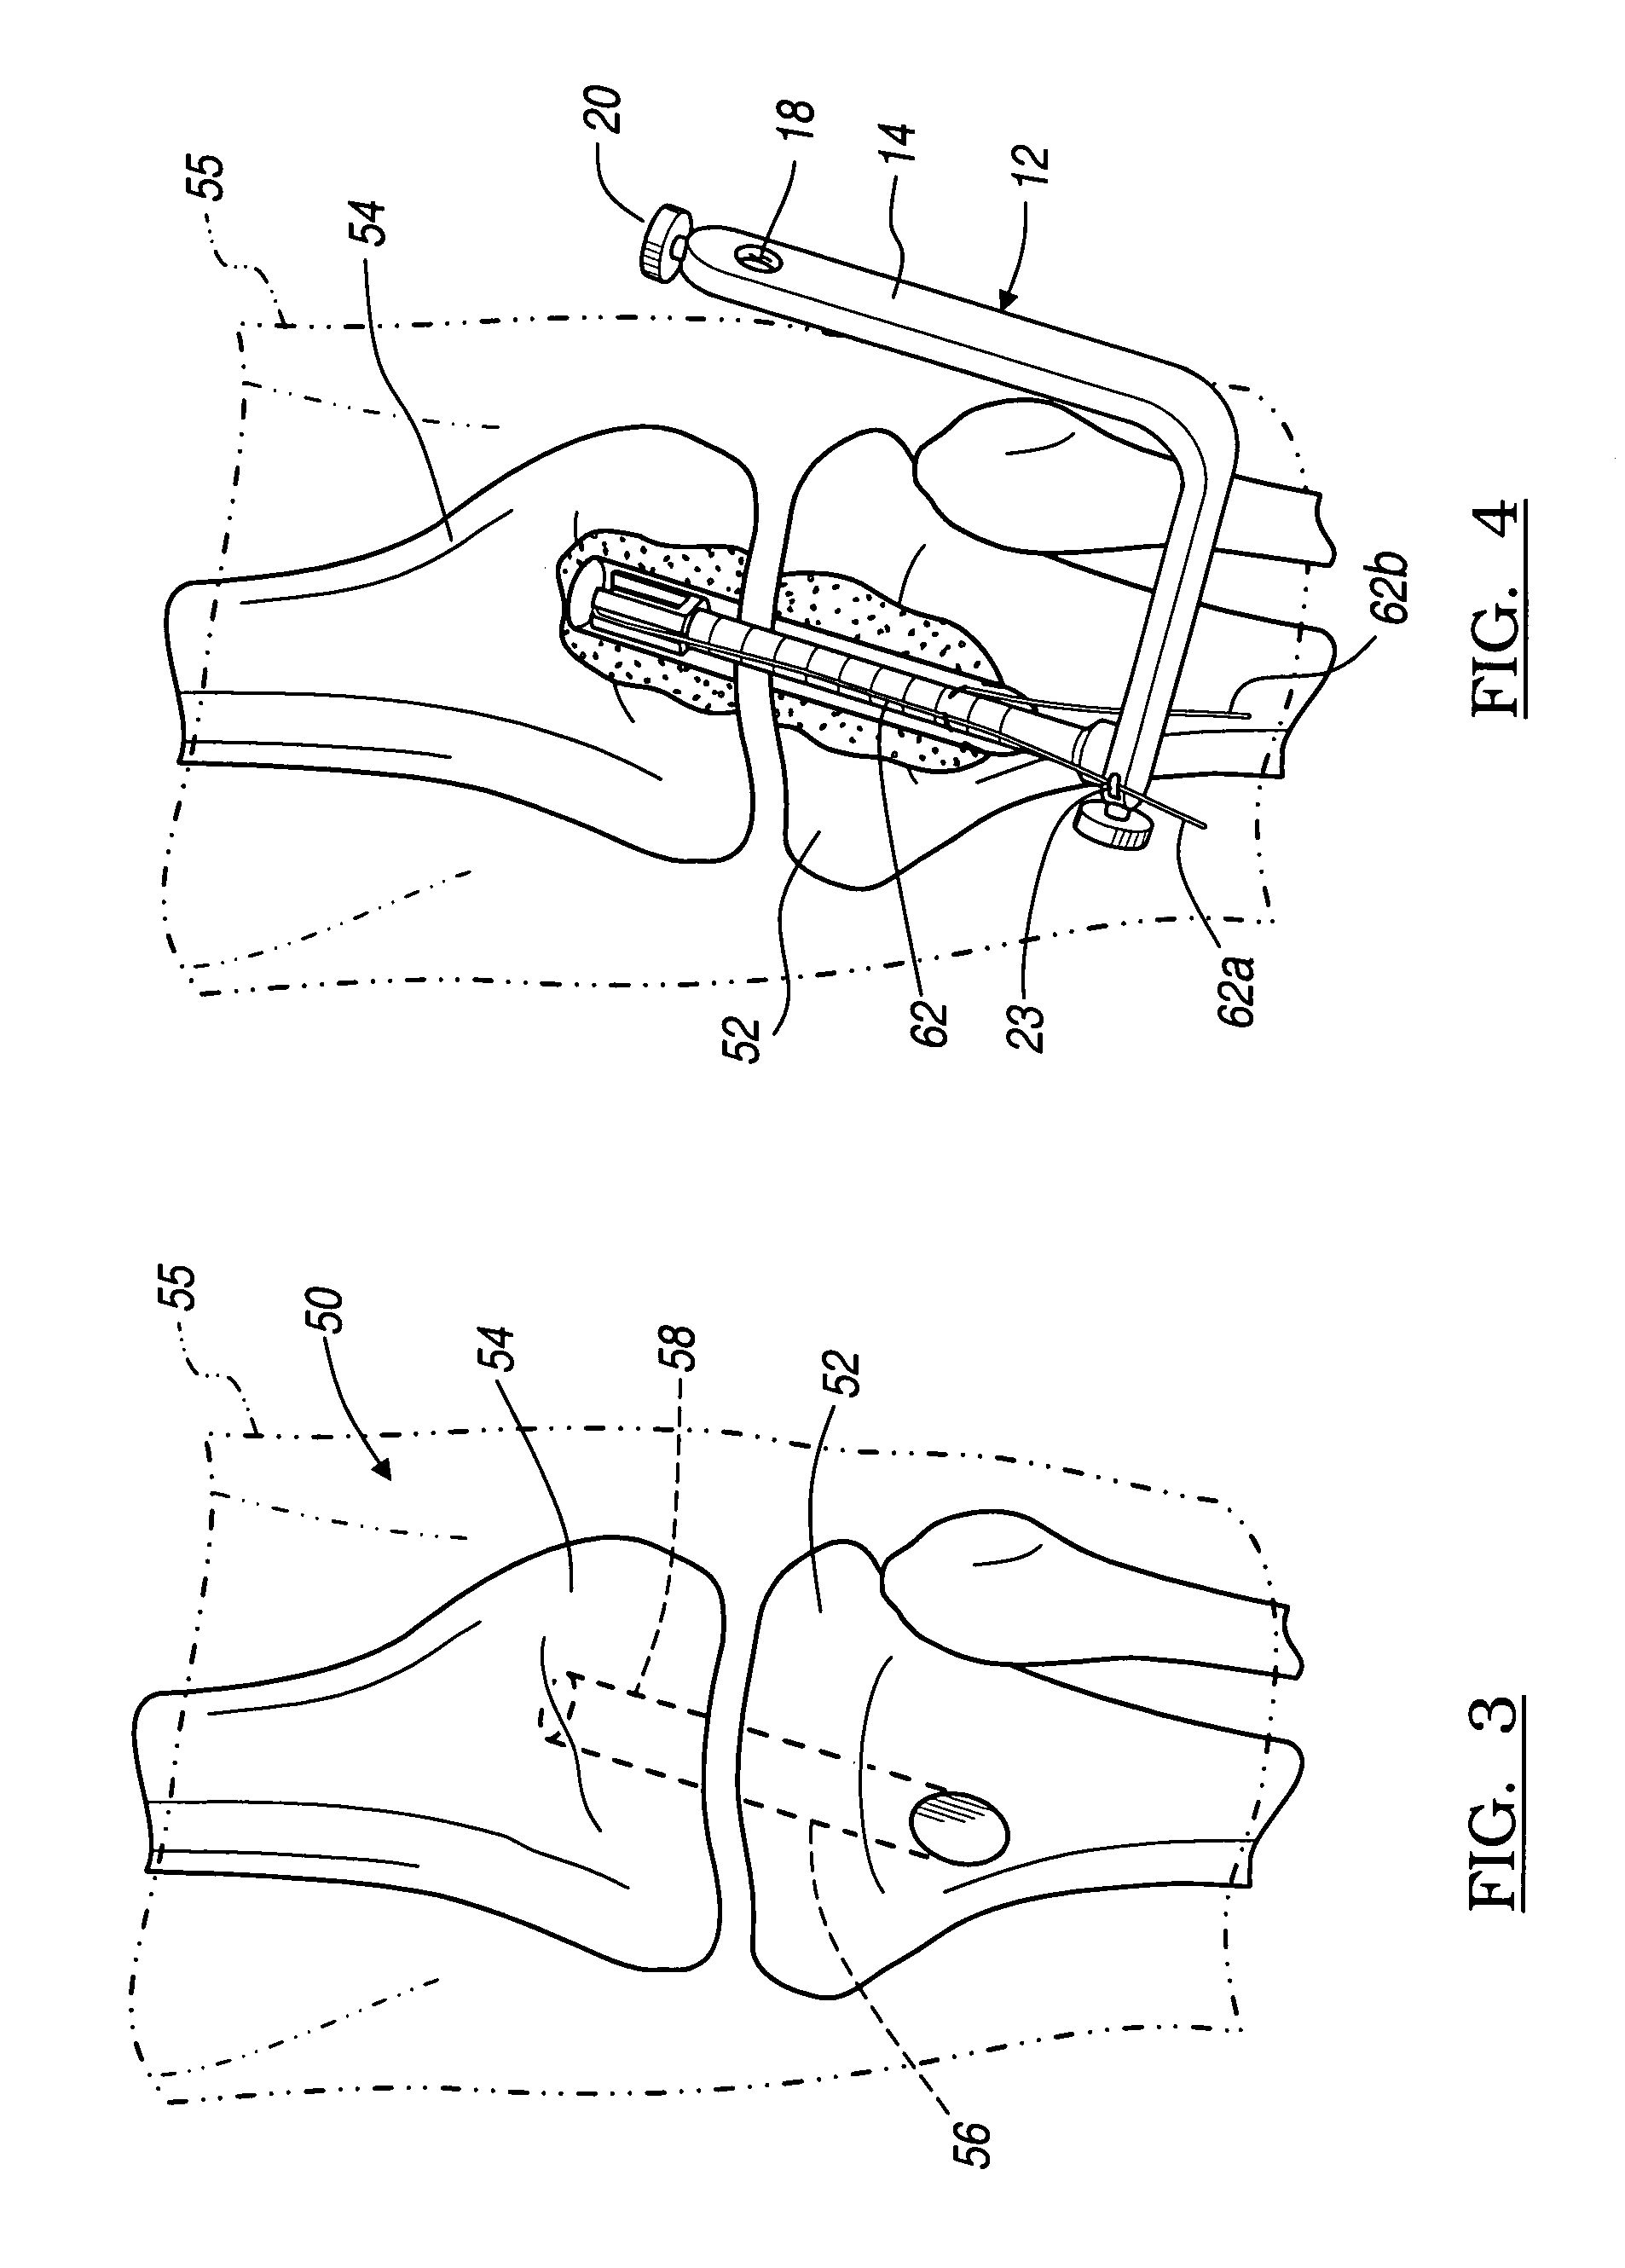 Apparatus and method for manipulating a flexible strand and soft tissue replacement during surgery